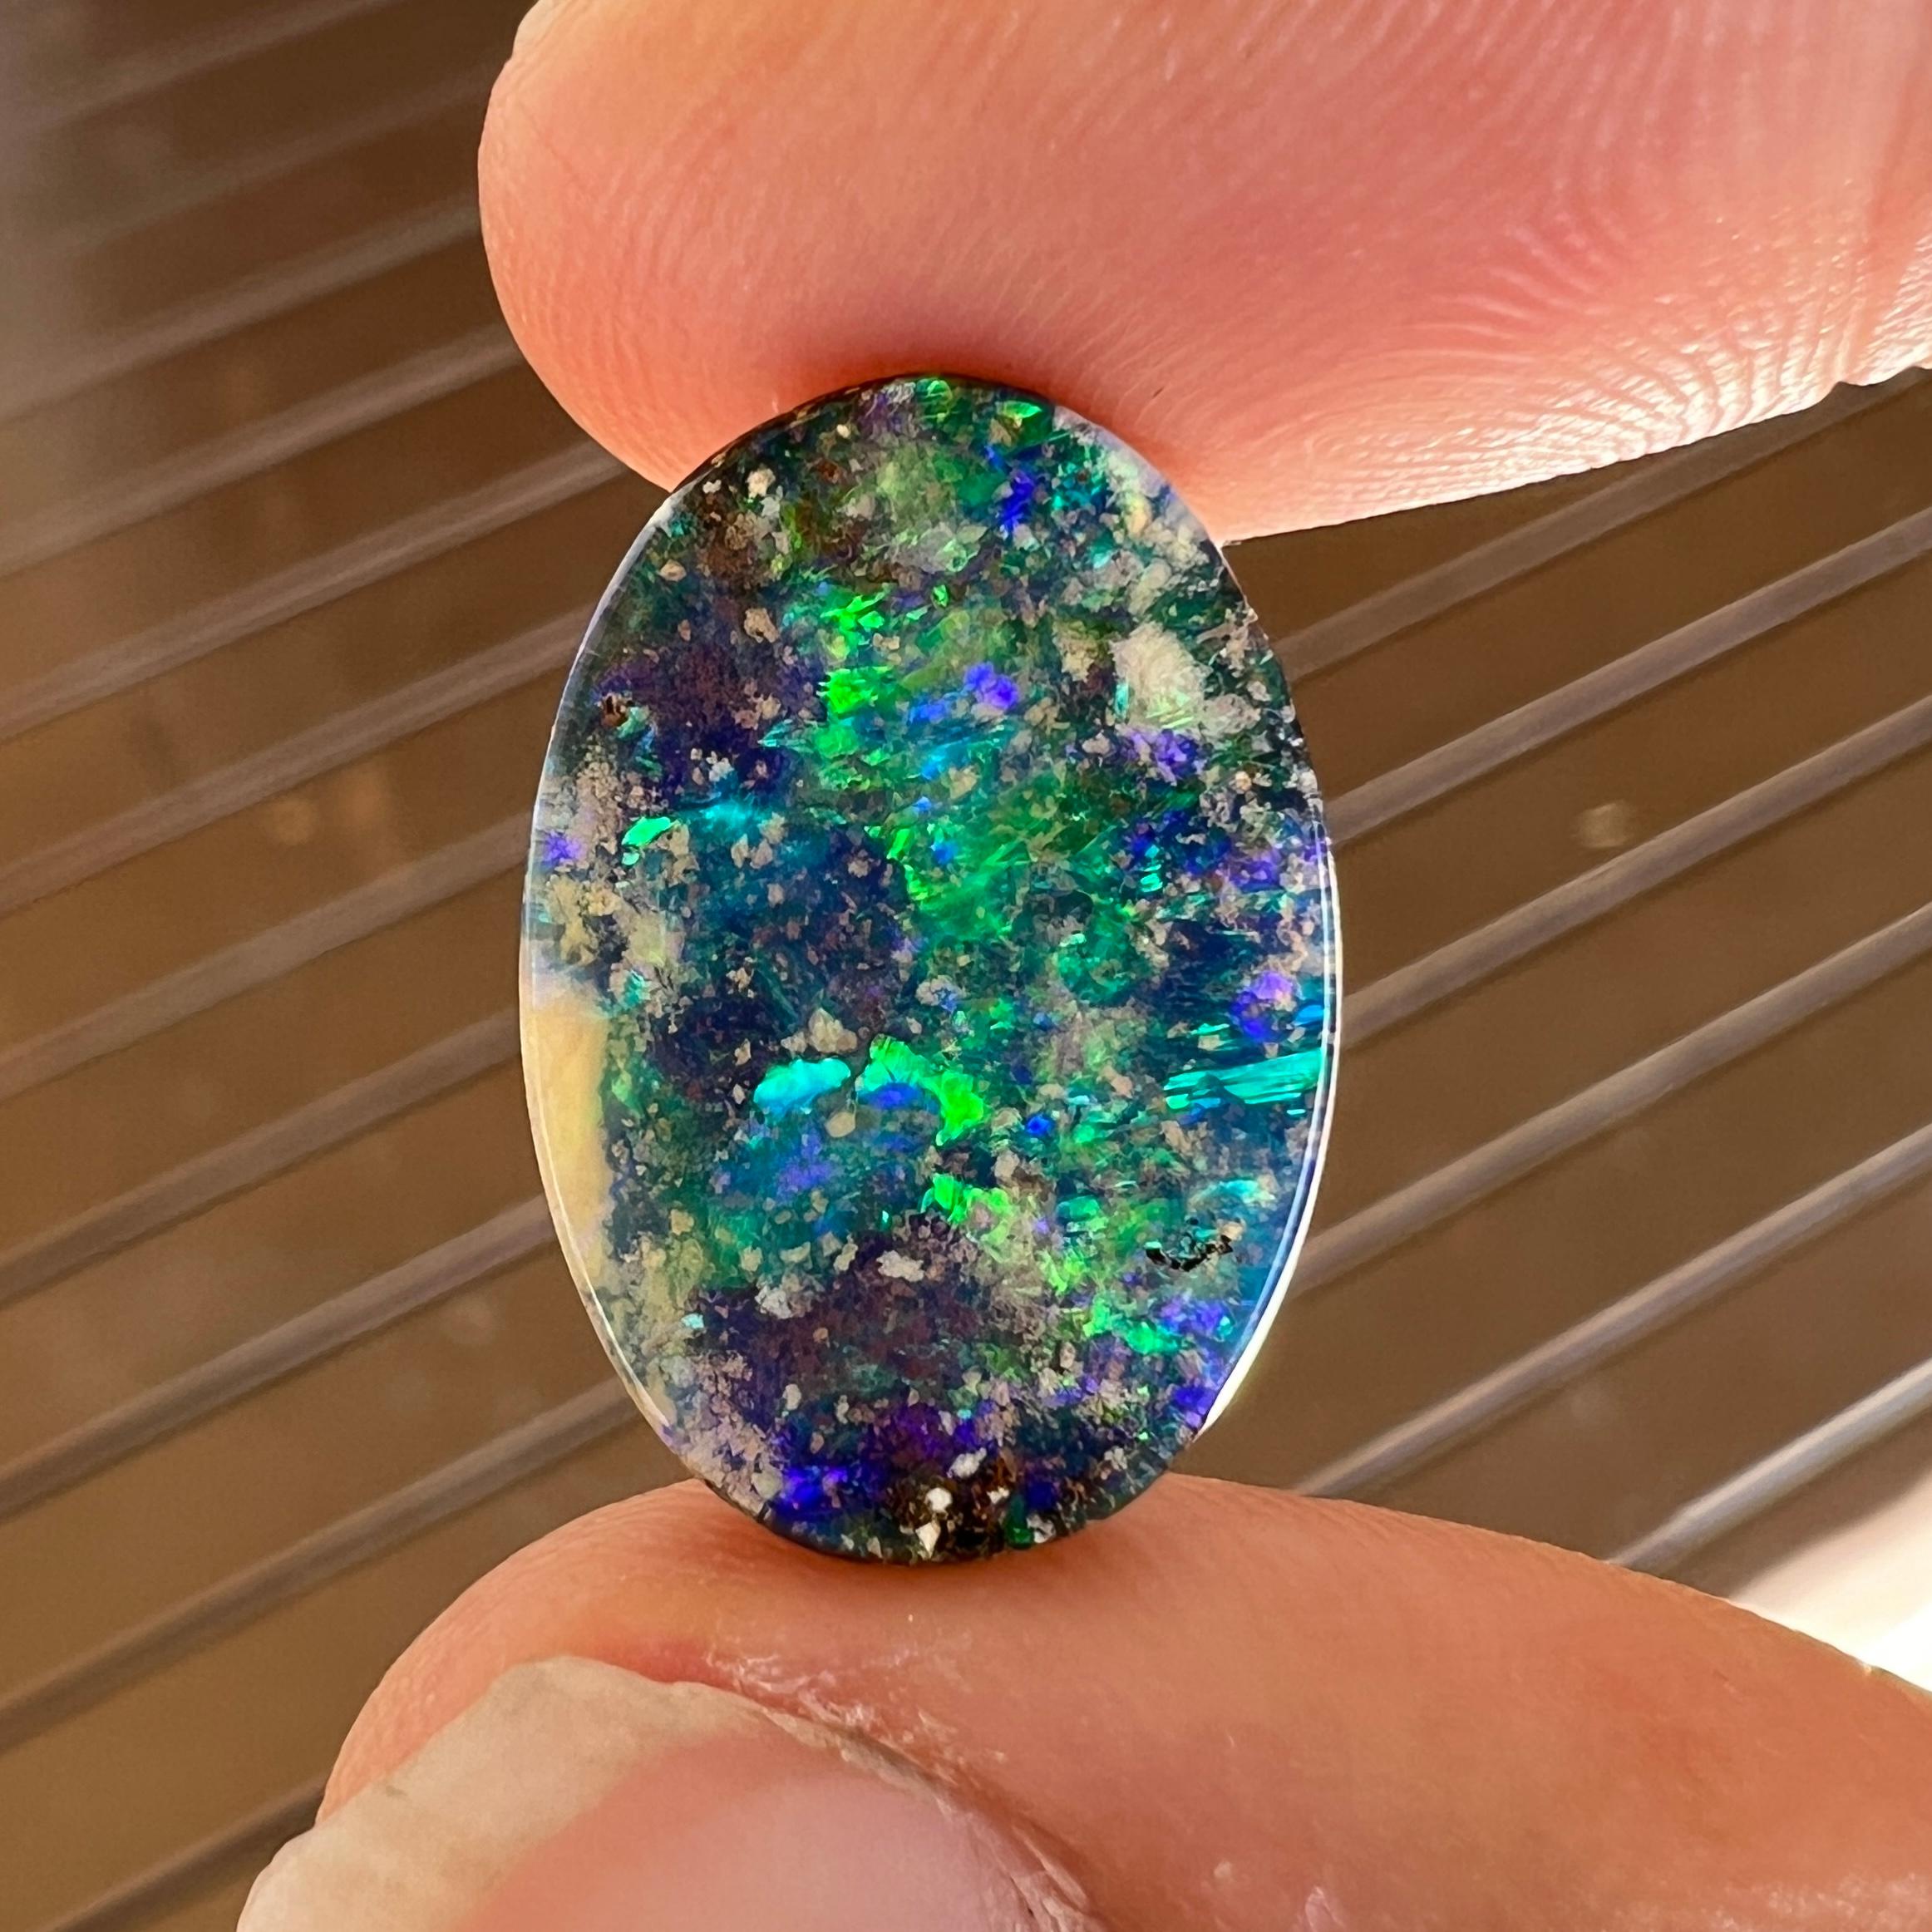 This amazing 5.89 Ct Australian black boulder opal was mined by Sue Cooper at her Yaraka opal mine in western Queensland, Australia in 2023. Sue processed the rough opal herself and cut into into a classic oval shape. We love how bright its green,